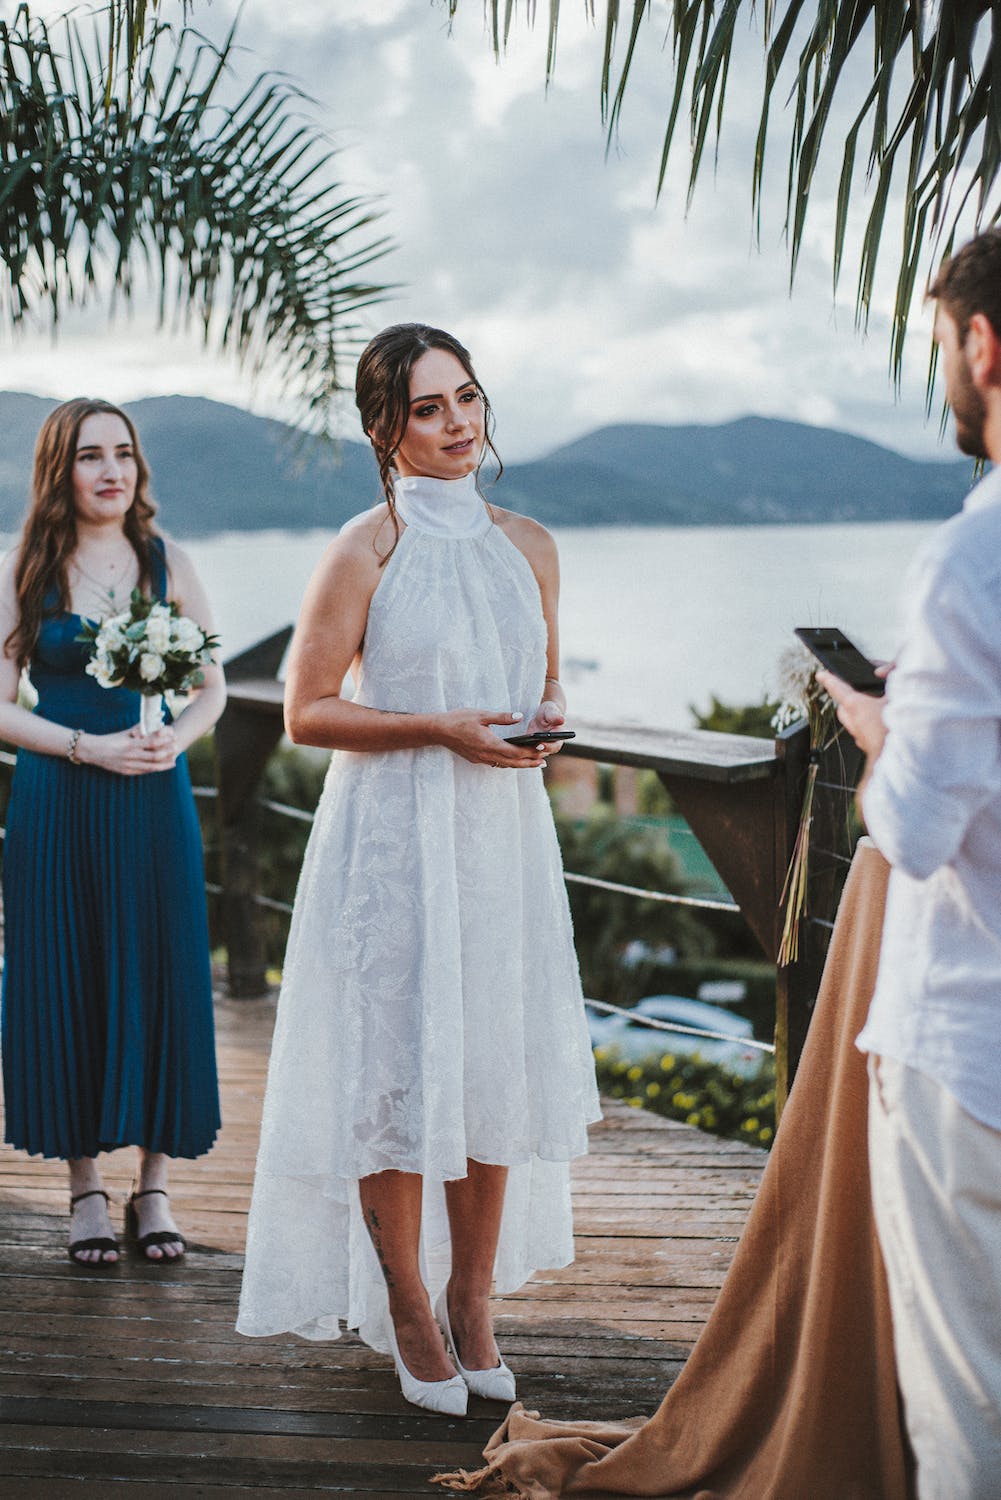 A bride in white and her maid of honor standing in front of the groom in white | Source: Pexels